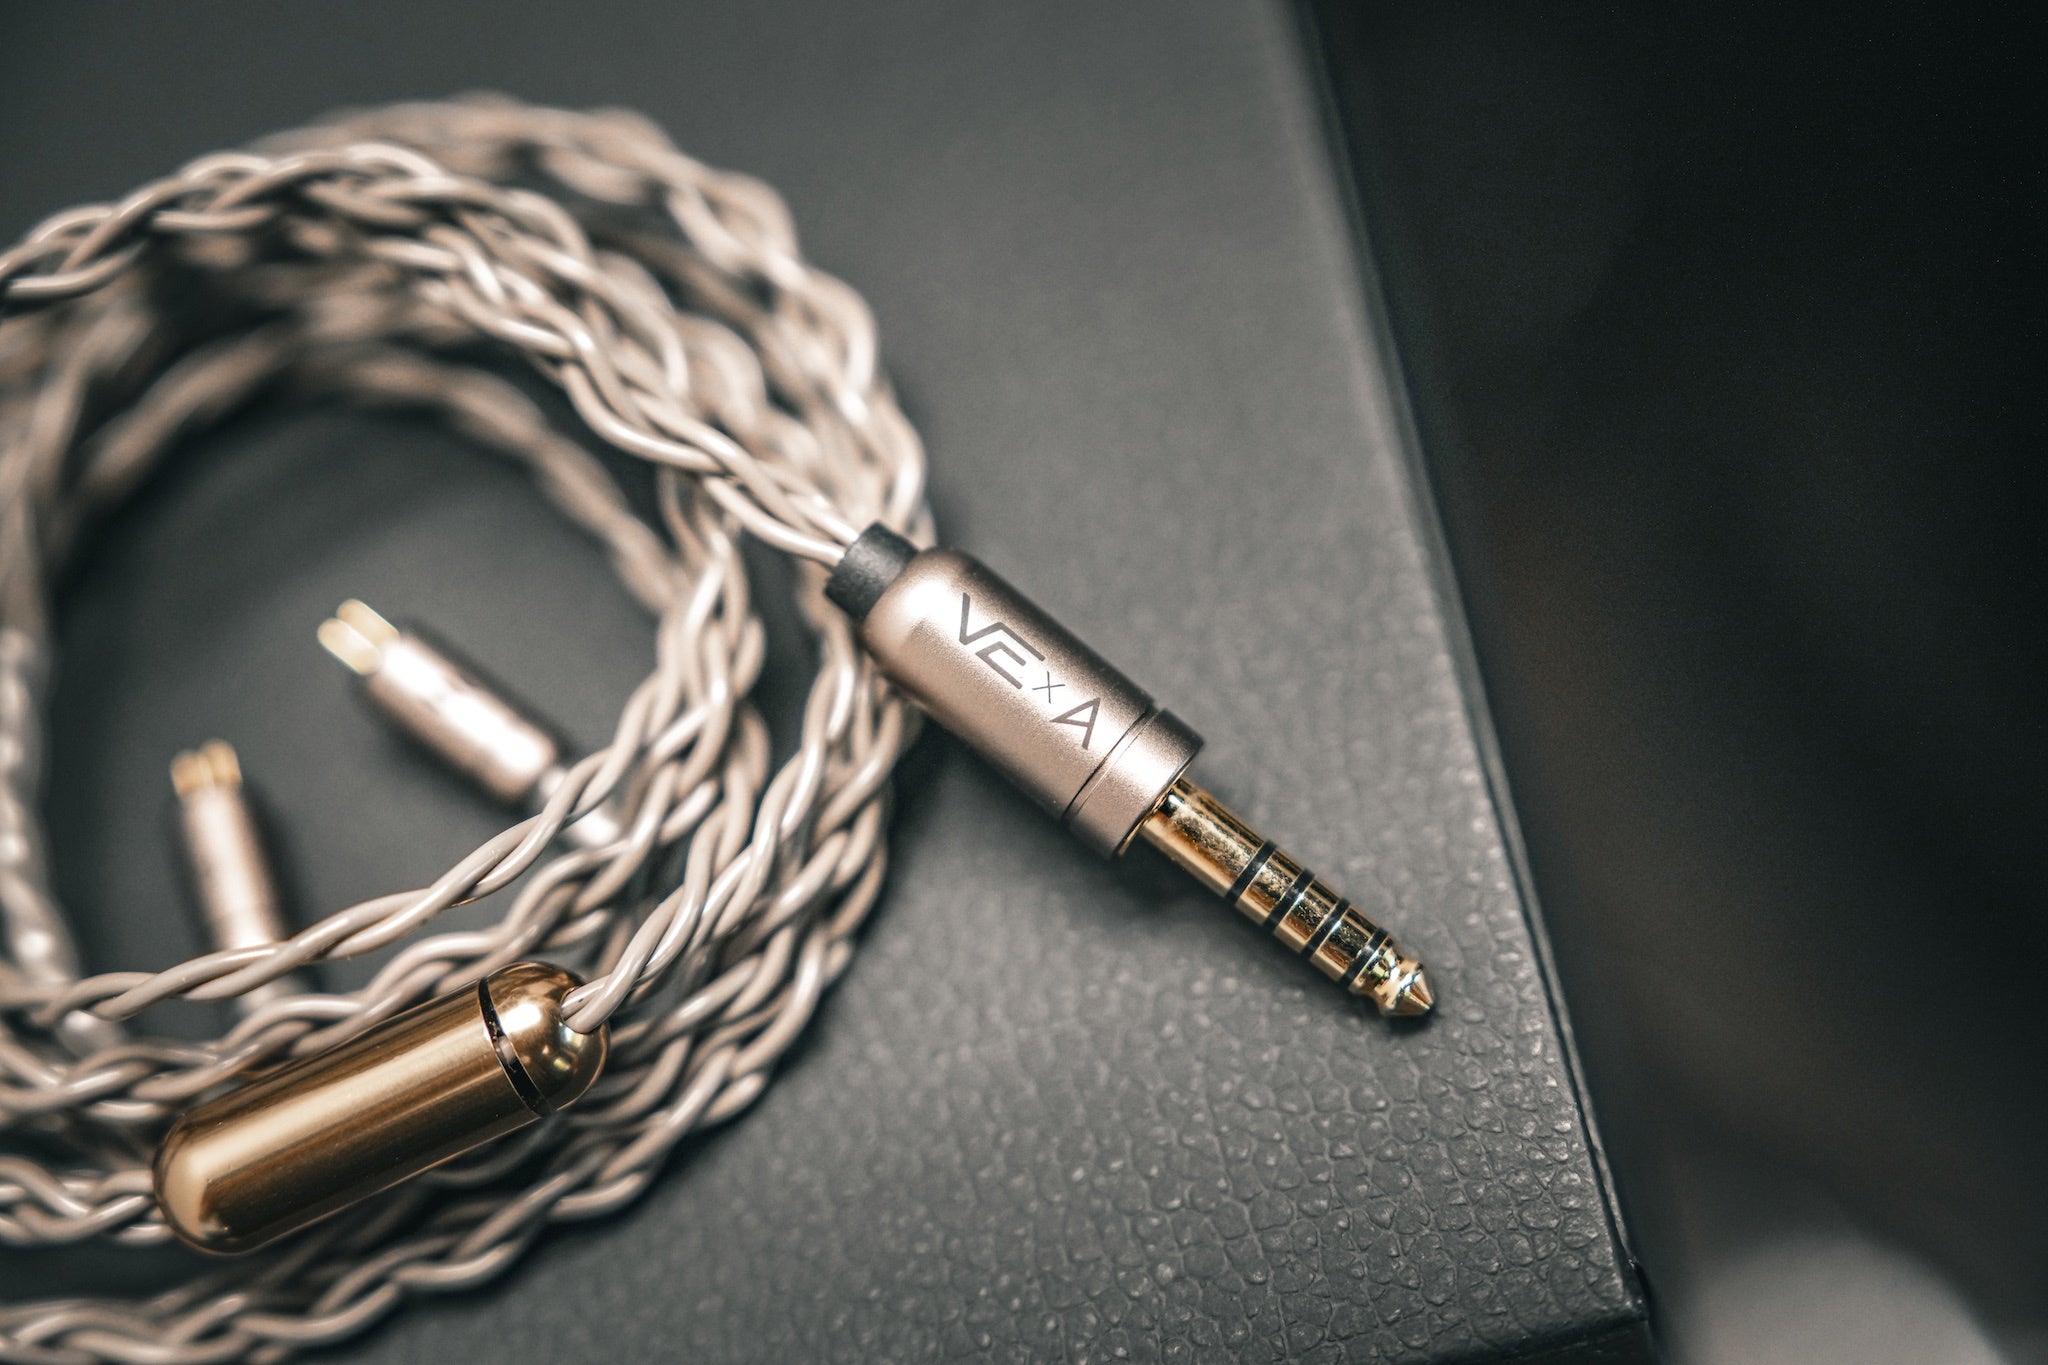 included Effect Audio cable on top of leather box from the Bloom Audio gallery